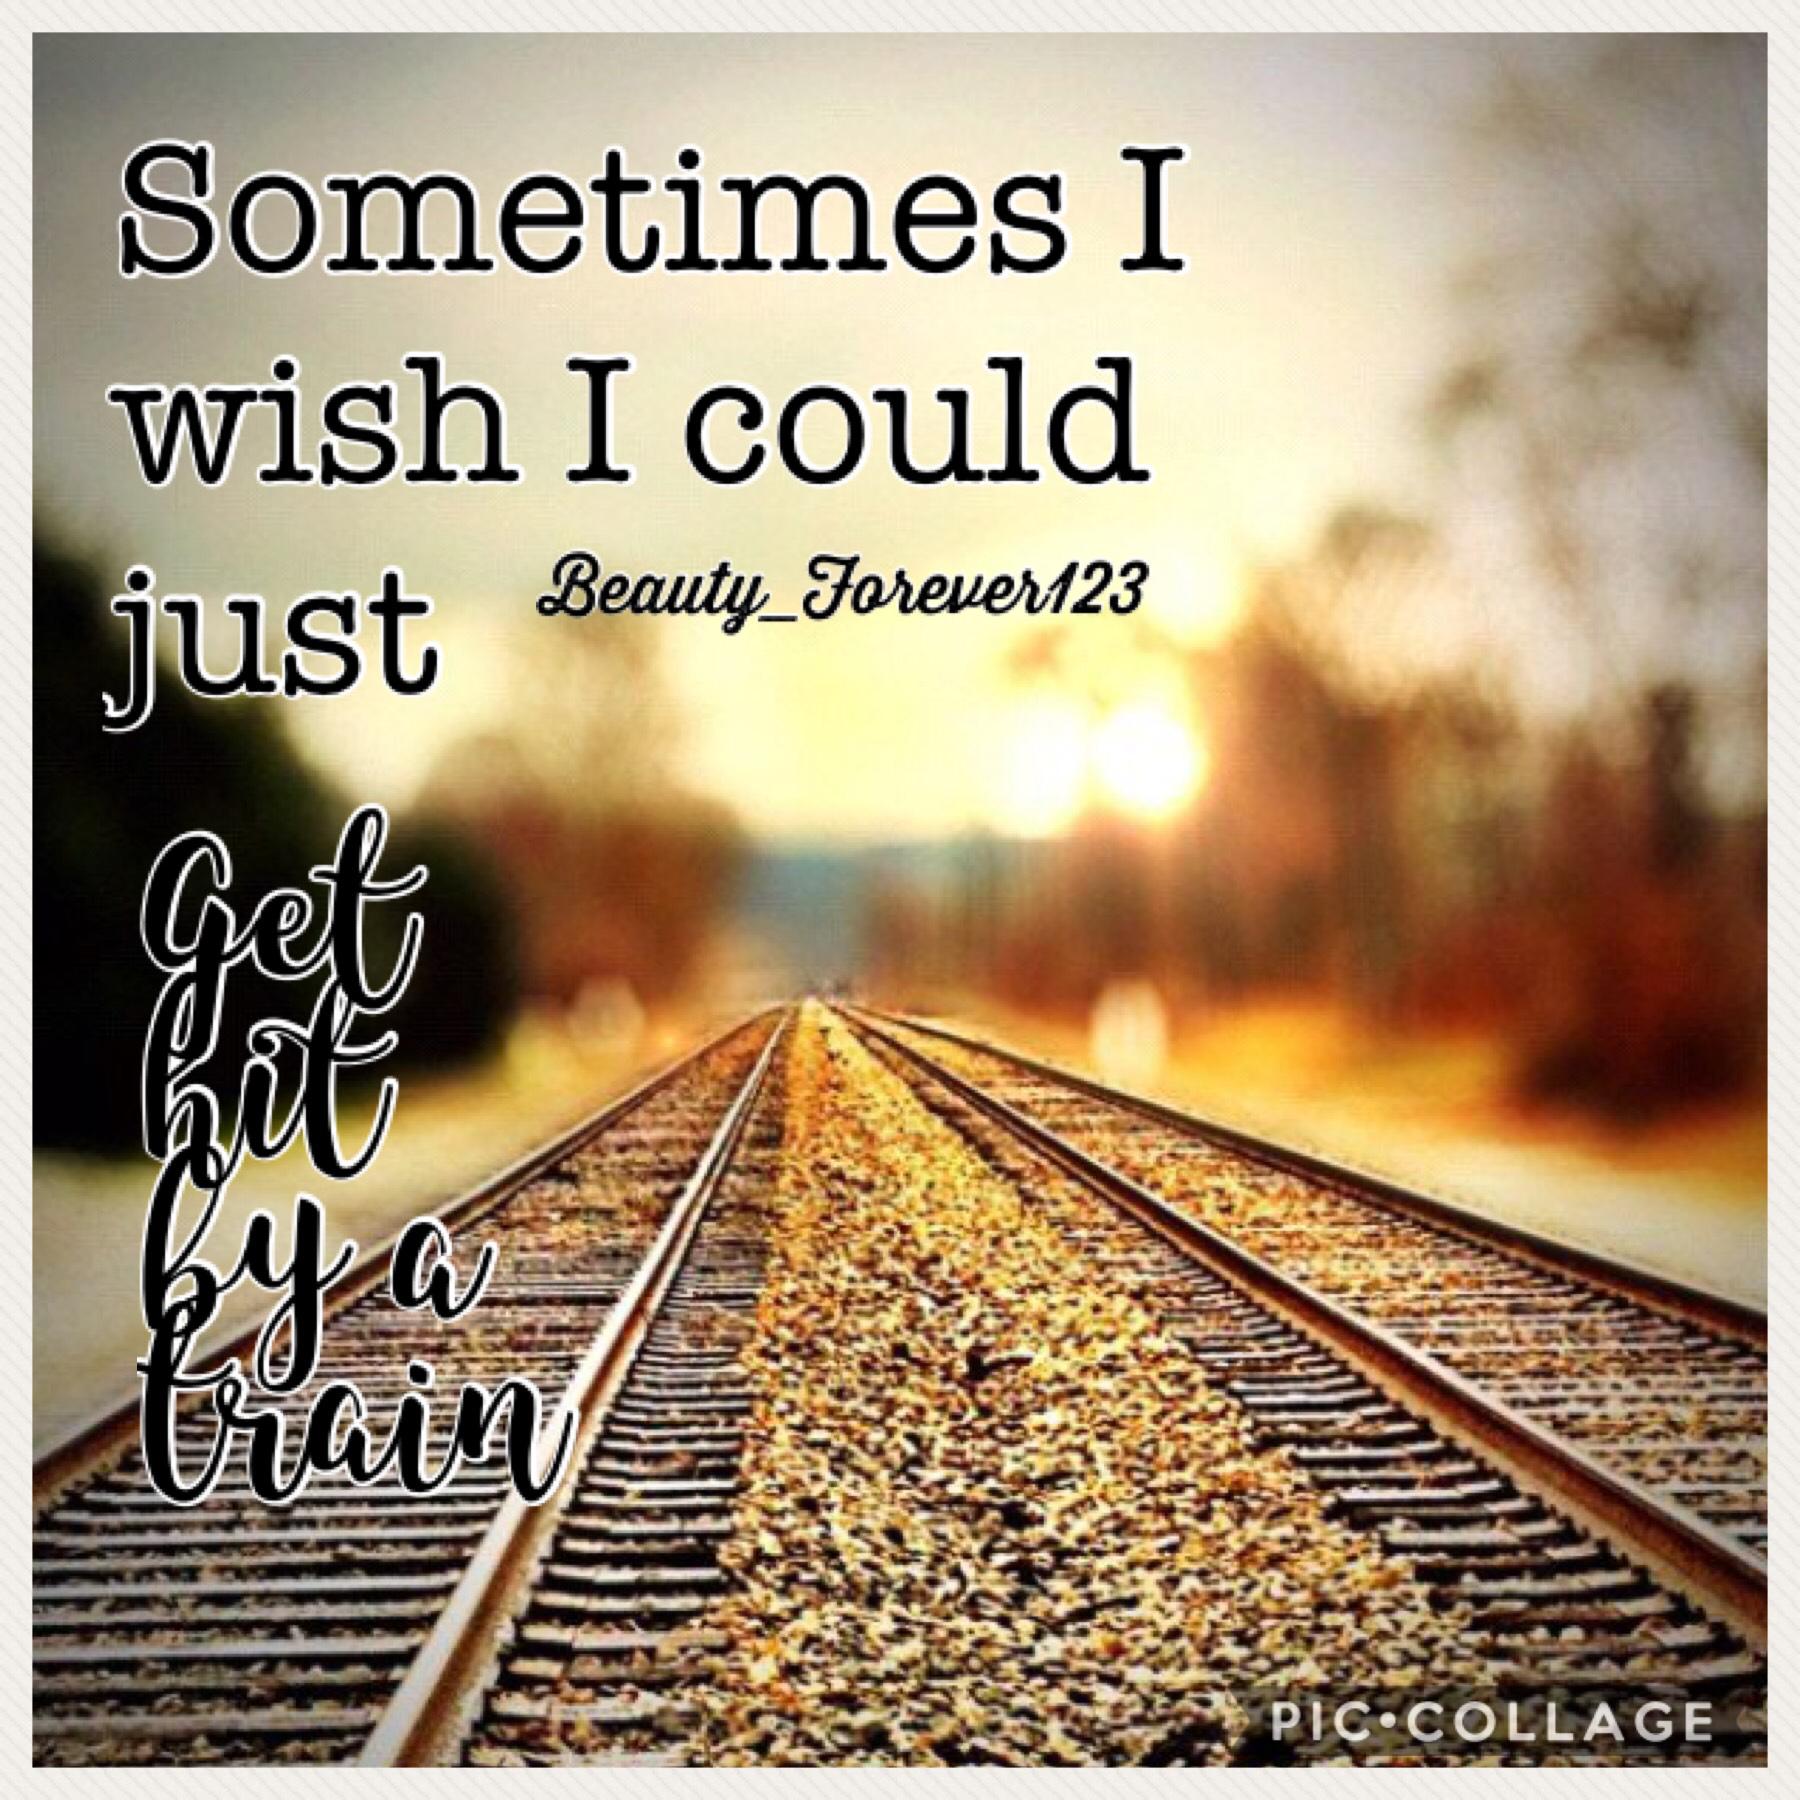 “ Sometimes I wish I could just get hit by a train “
😖😖😖💔💔💔